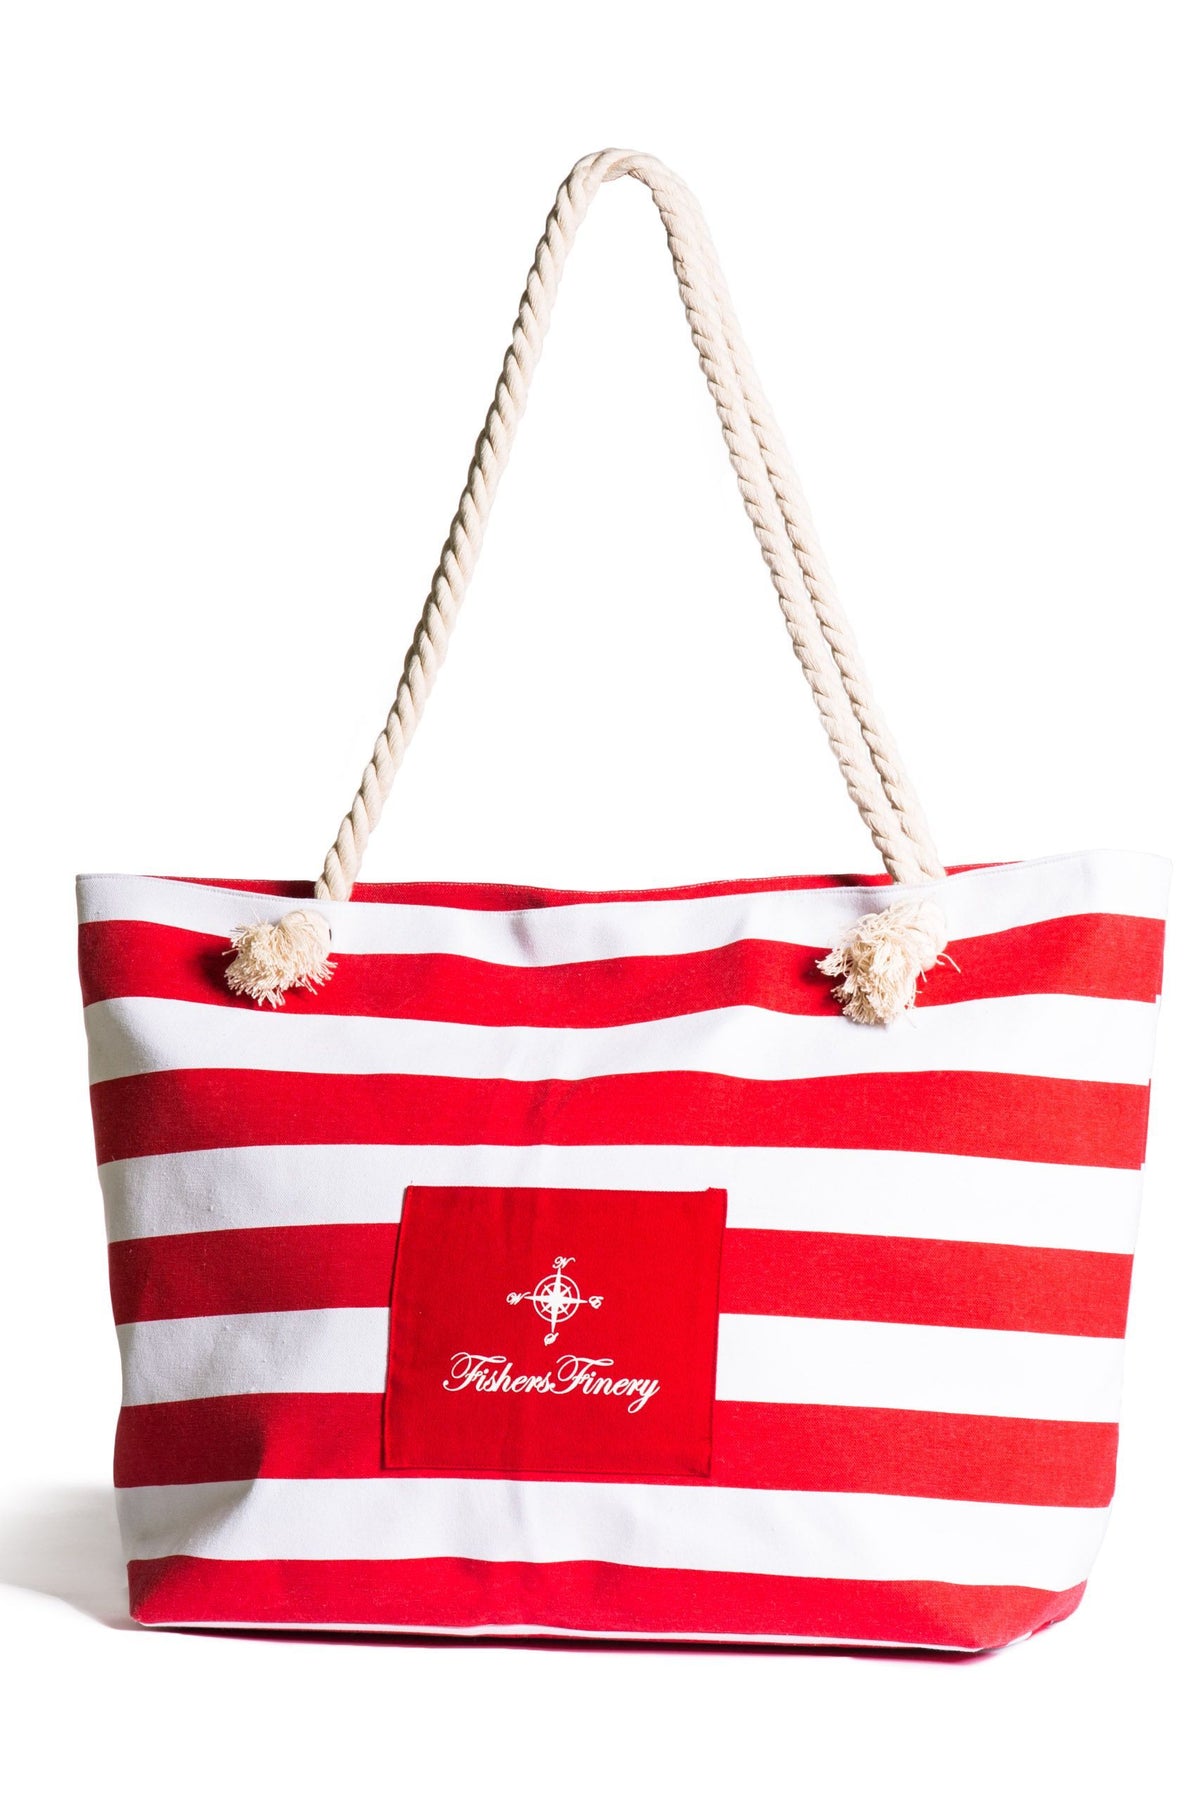 Large Canvas Beach Bag | Water Resistant plus Zipper | Fishers Finery